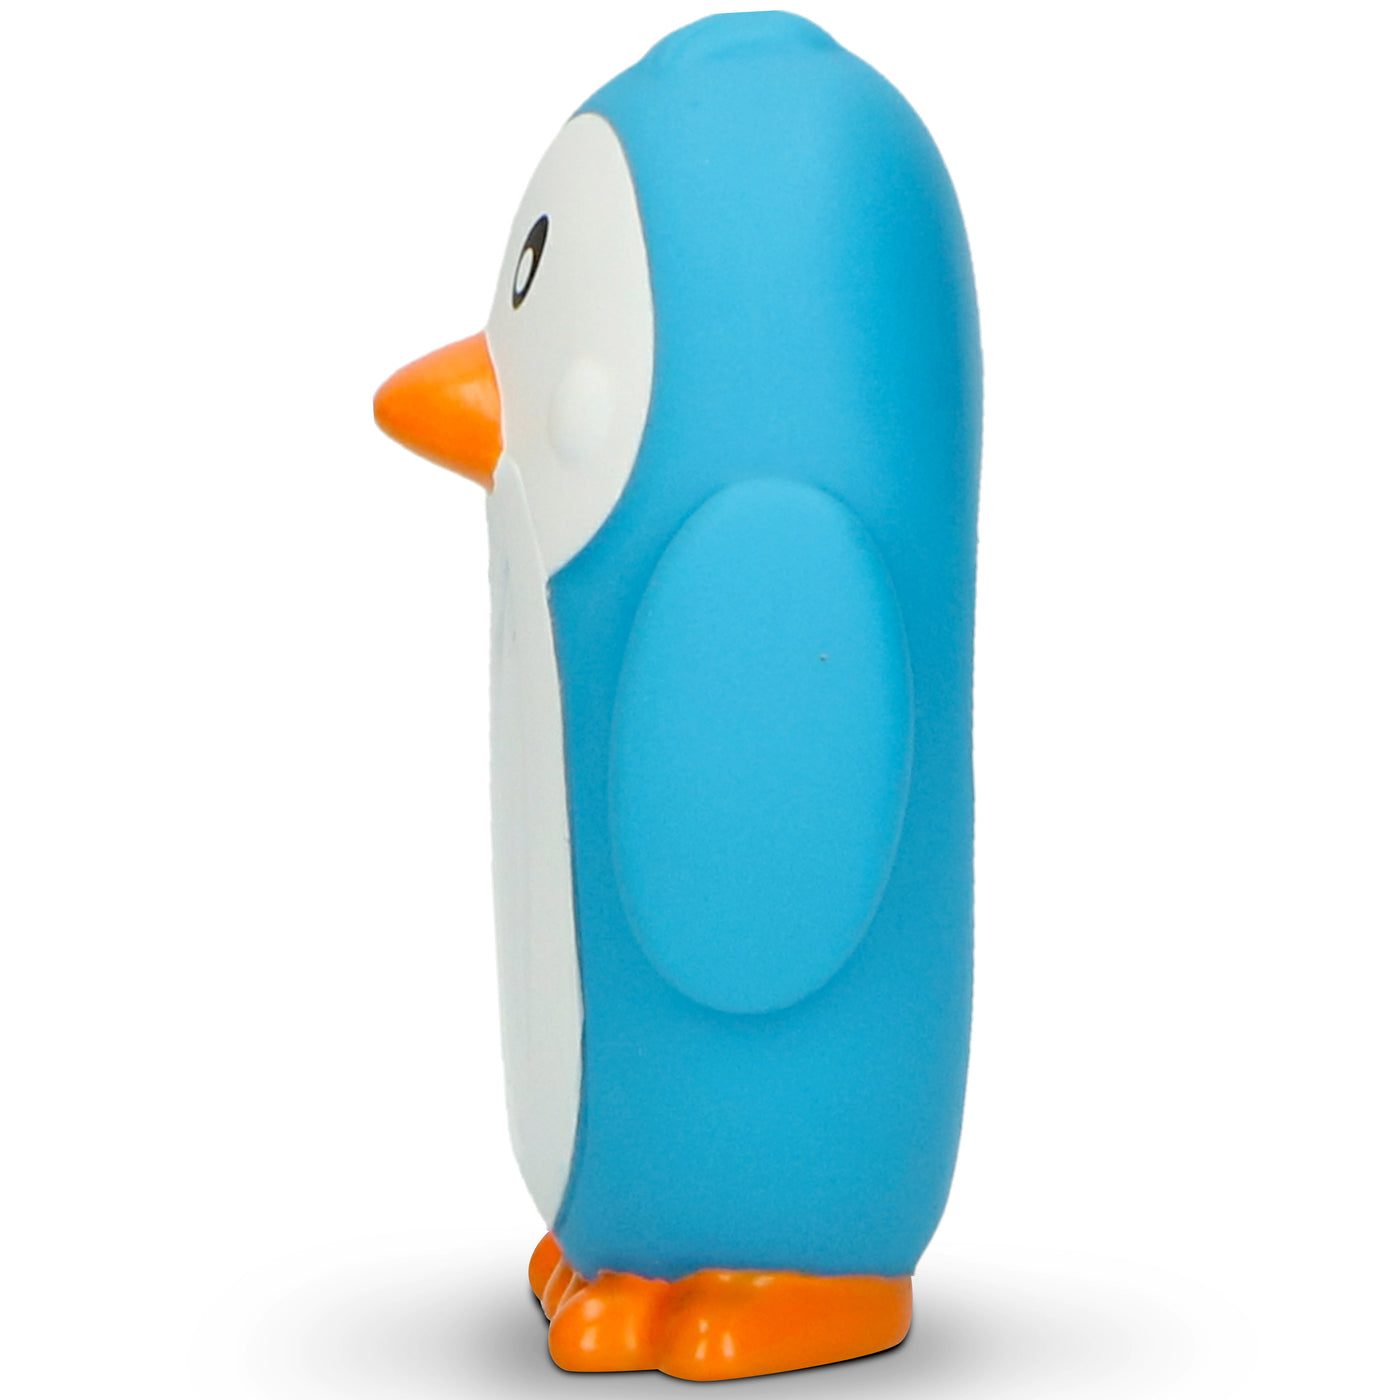 Alecto BC-11 PENGUIN - Badethermometer und Raumthermometer, Pinguin